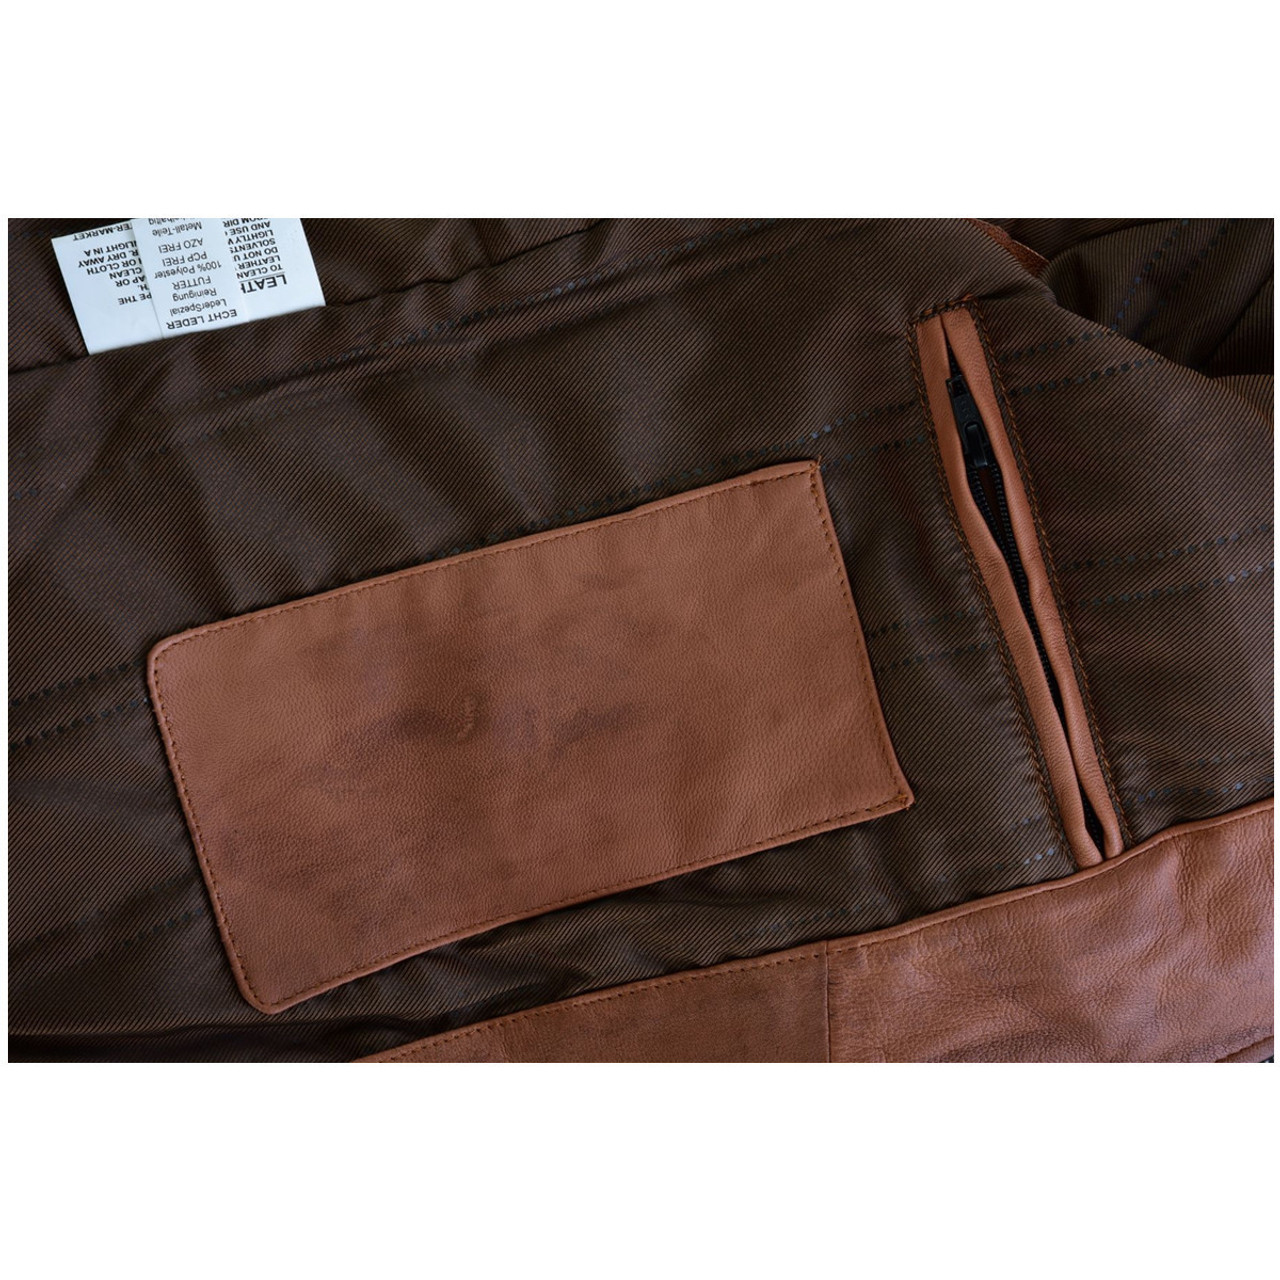 Vance Leathers' Men's Cafe Racer Waxed Lambskin Austin Brown Motorcycle Leather Jacket